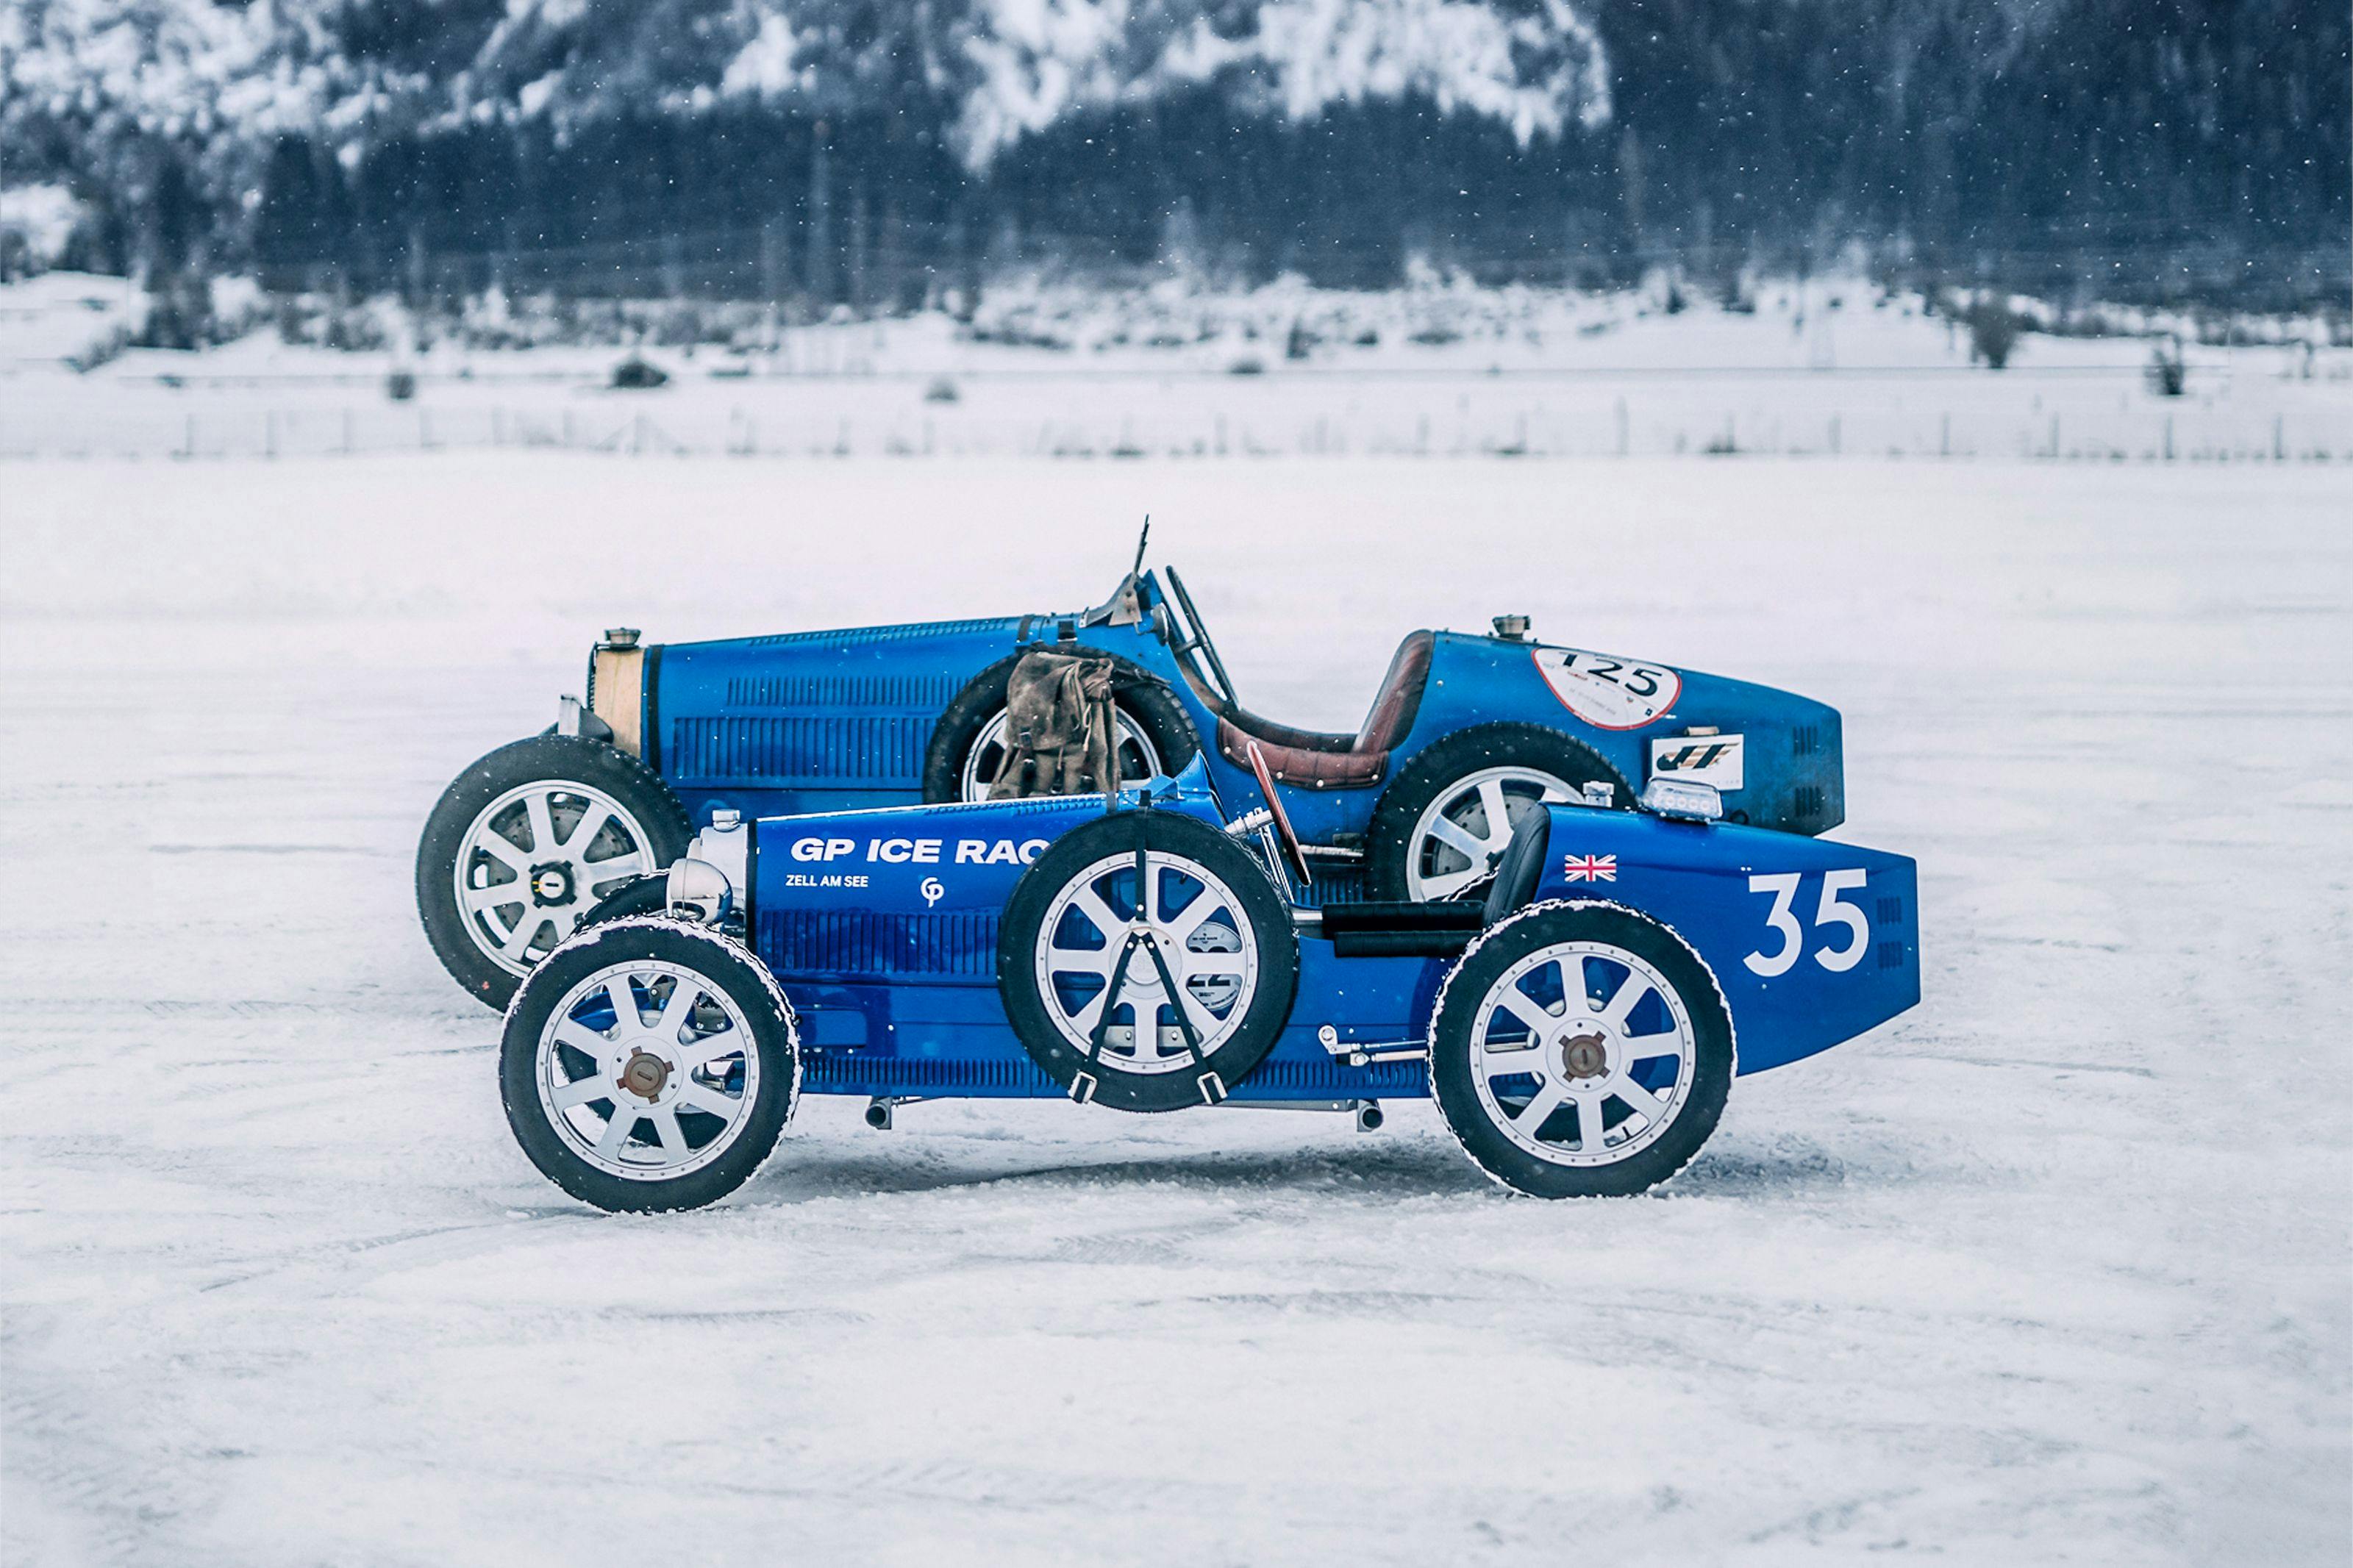 Bugatti Returns to GP Ice Race Over 60 Years After its Maiden Appearance